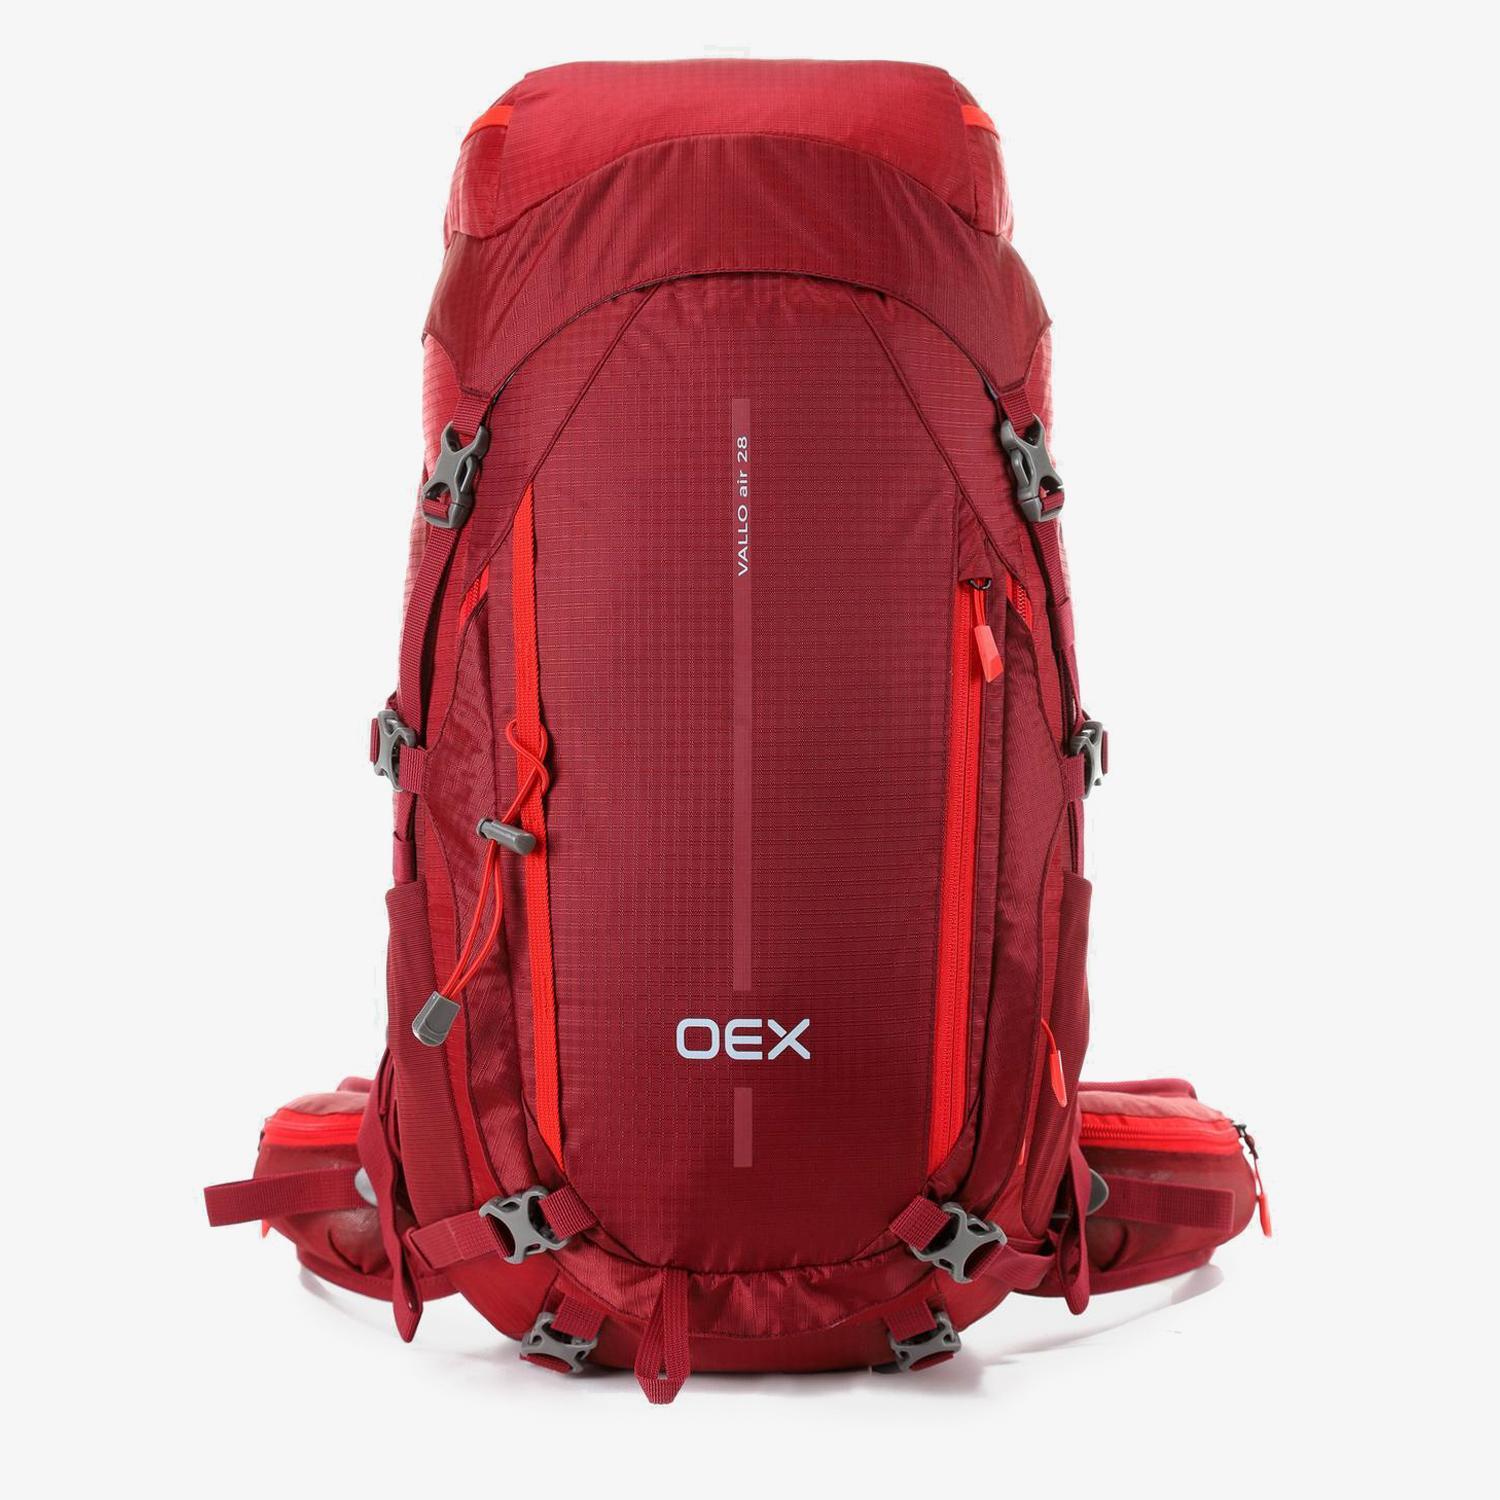 Oex Vallo Air 28l. - Rouge - Sac à dos Montagne sports taille UNICA